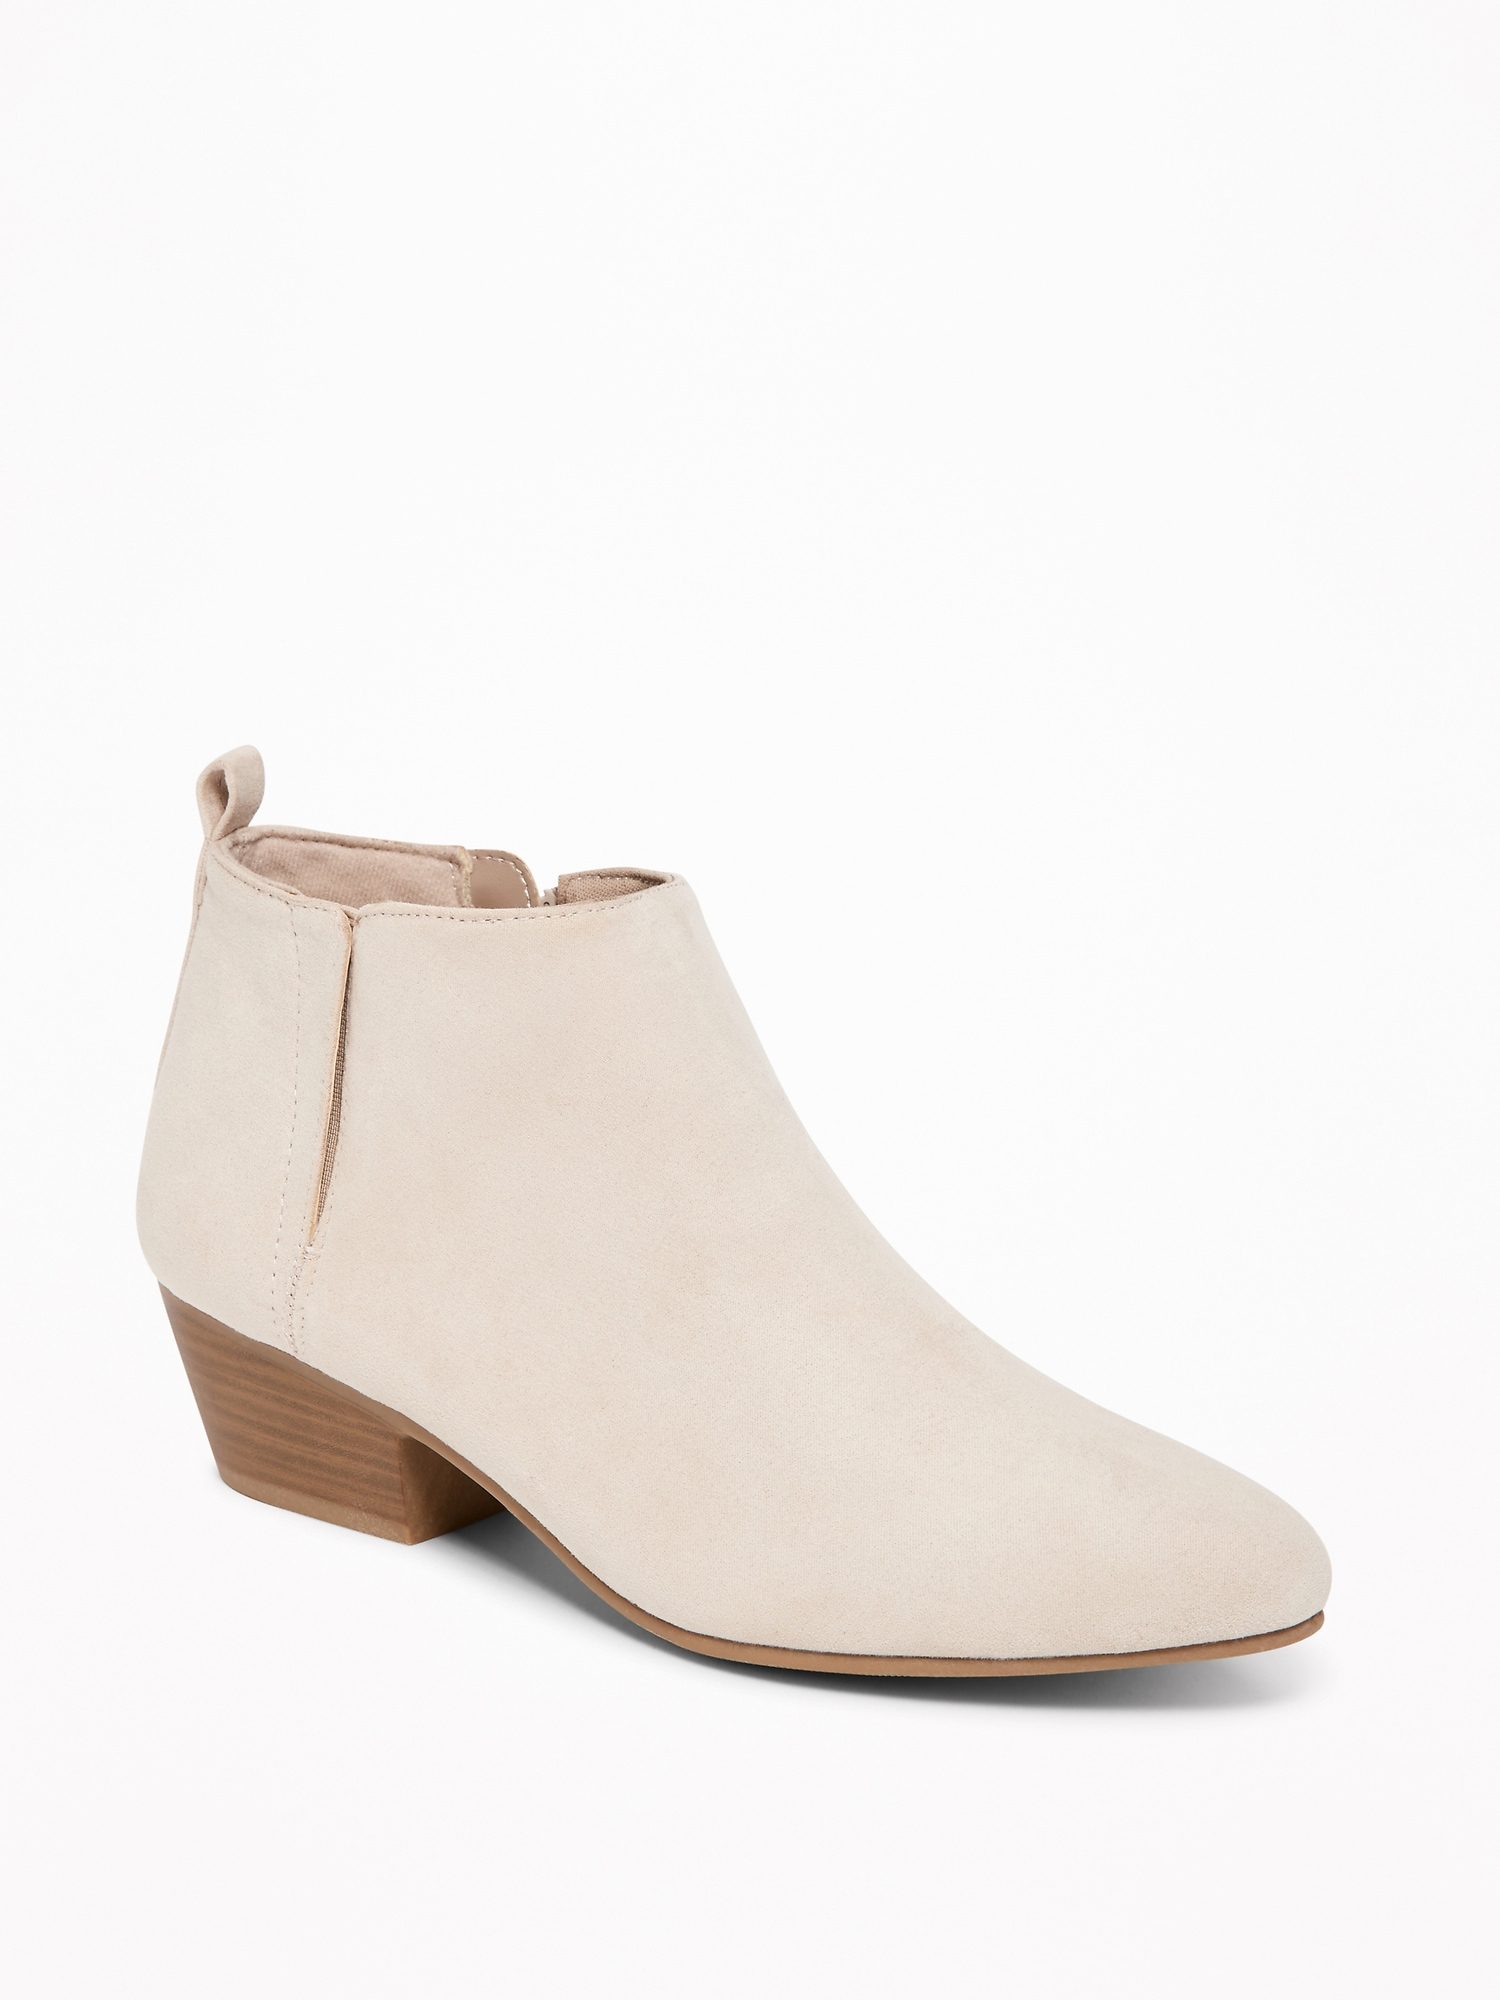 Sueded Ankle Boots for Women - Sidewalk Ends